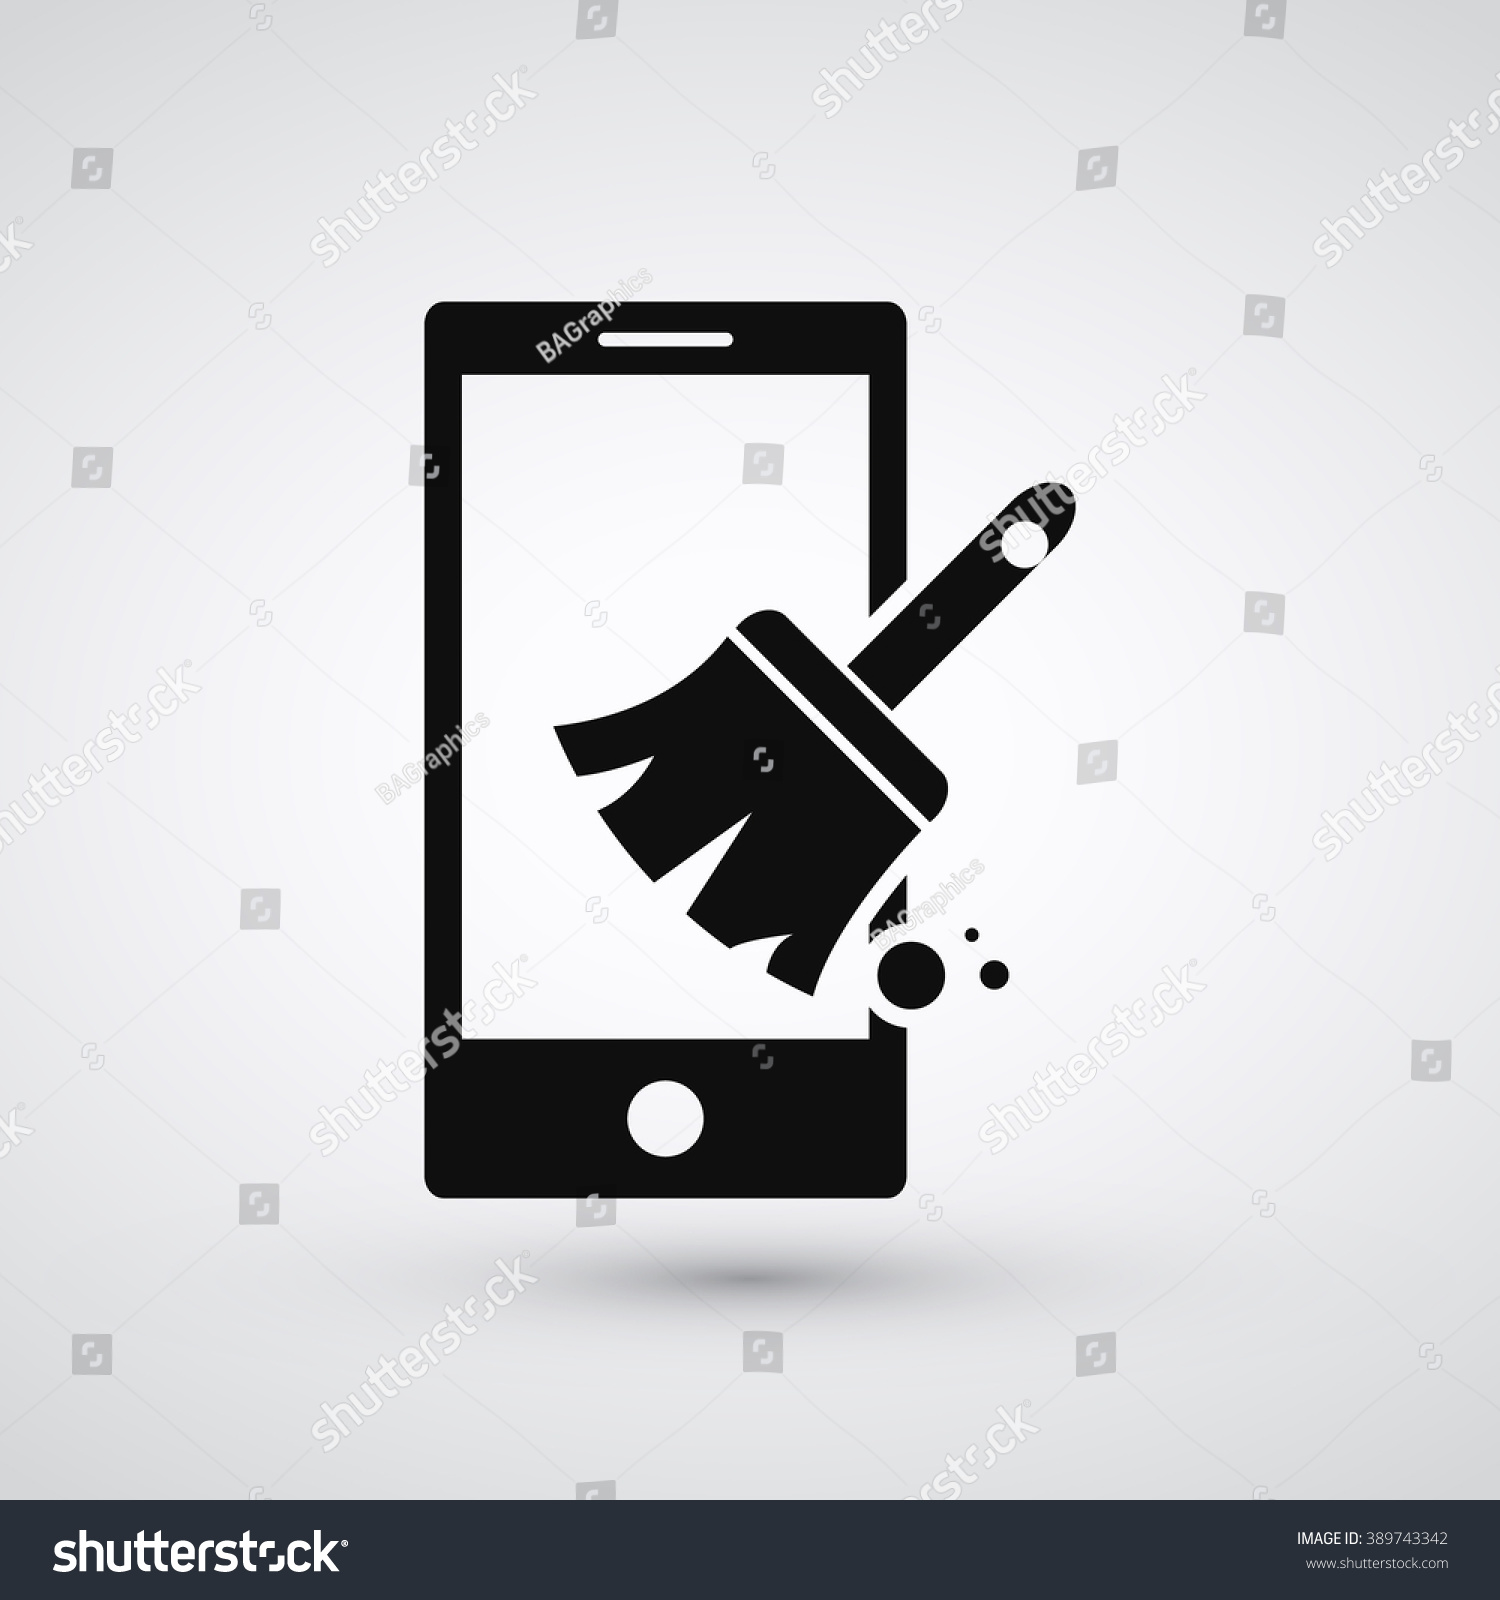 SVG of Phone and Cleaner icon. Clear phone RAM cache and get boosted. Cleaner broom,  broomstick. Vector icon graphic element illustration. Compatible with ai, cdr, jpg, png, svg, pdf, ico and eps. svg